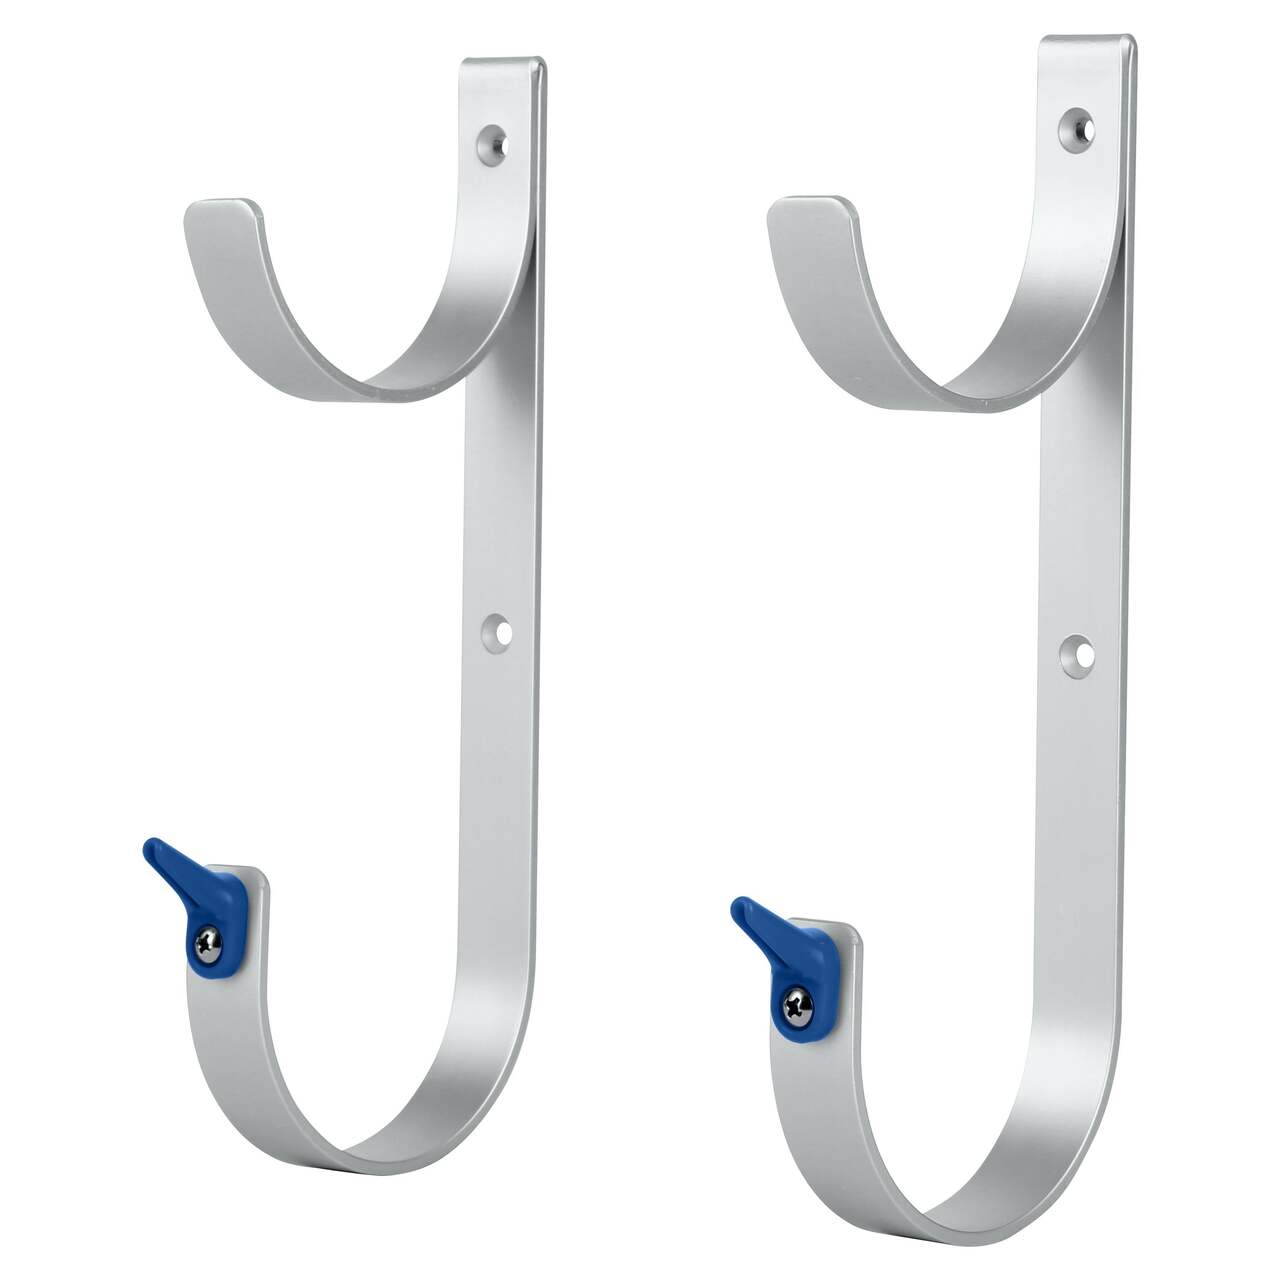 Hooks available for purchase I Australian Boating Supplies